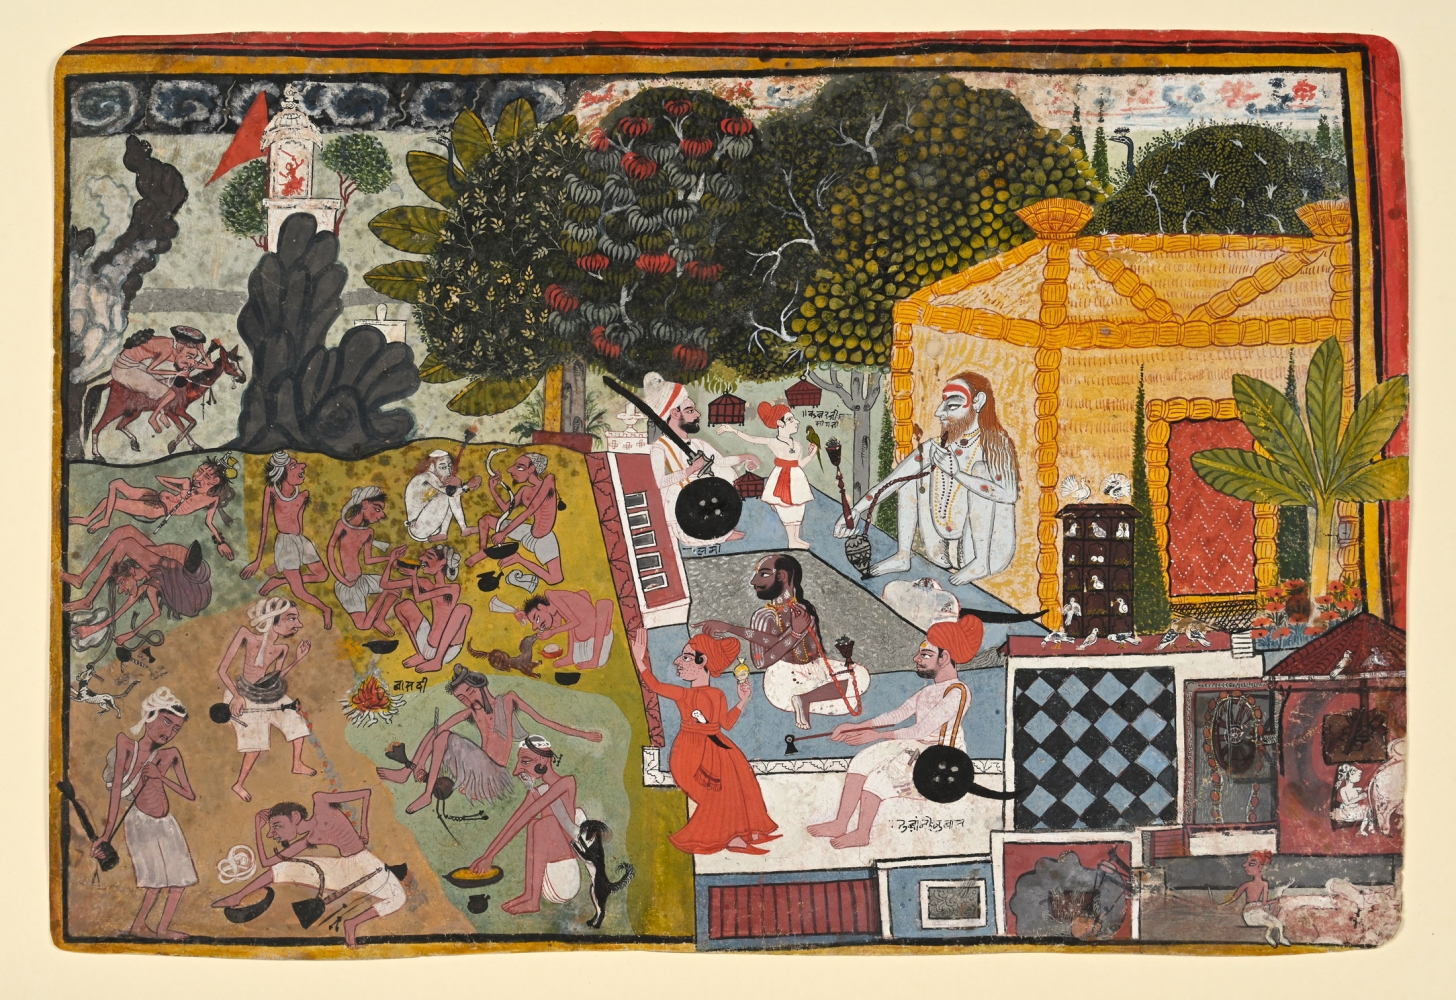 A prince, an ascetic and drug-addled sadhus, c. 1790
Sawar, attributed to Pemji
Opaque pigments on paper
10 5/8 x 14 1/8 inches
(27 x 36 cm)